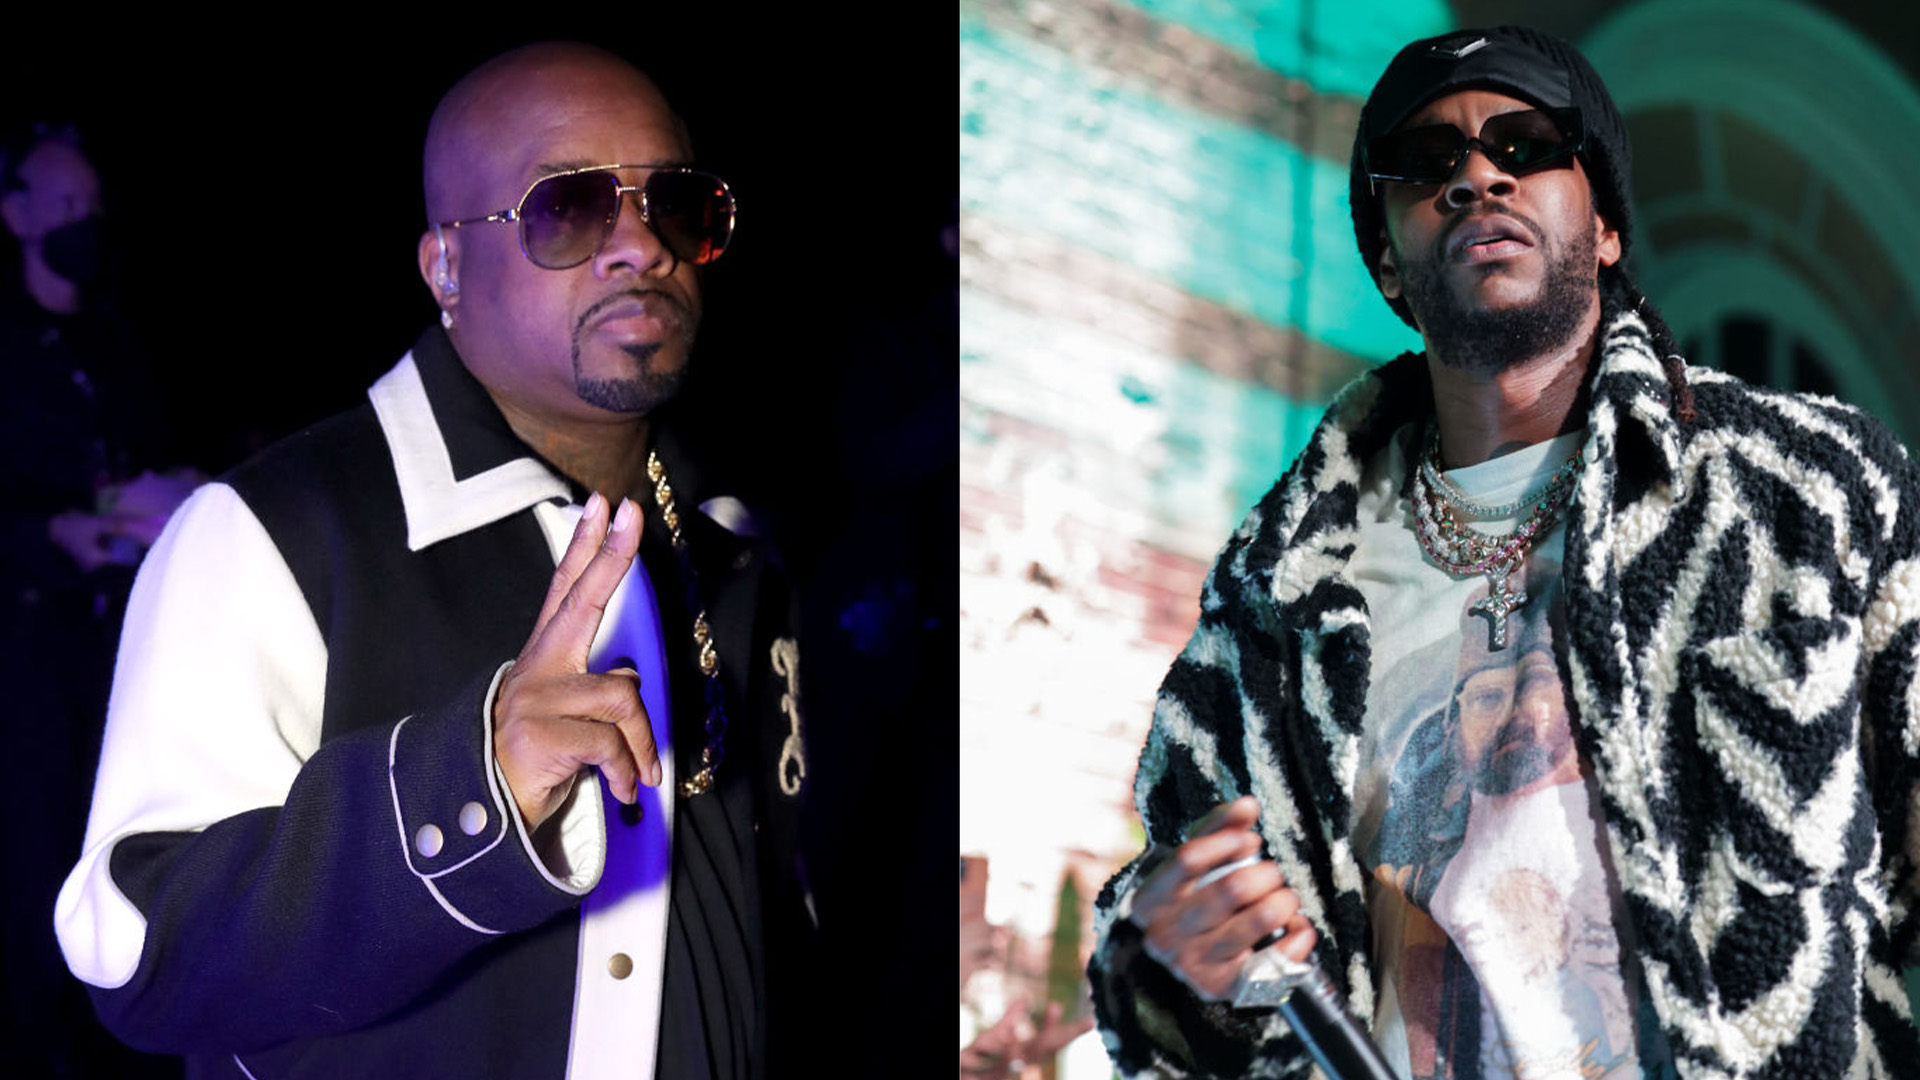 Jermaine Dupri Recalls 2 Chainz 'Respectfully' Rejecting His Attempt To Sign Him As An Artist